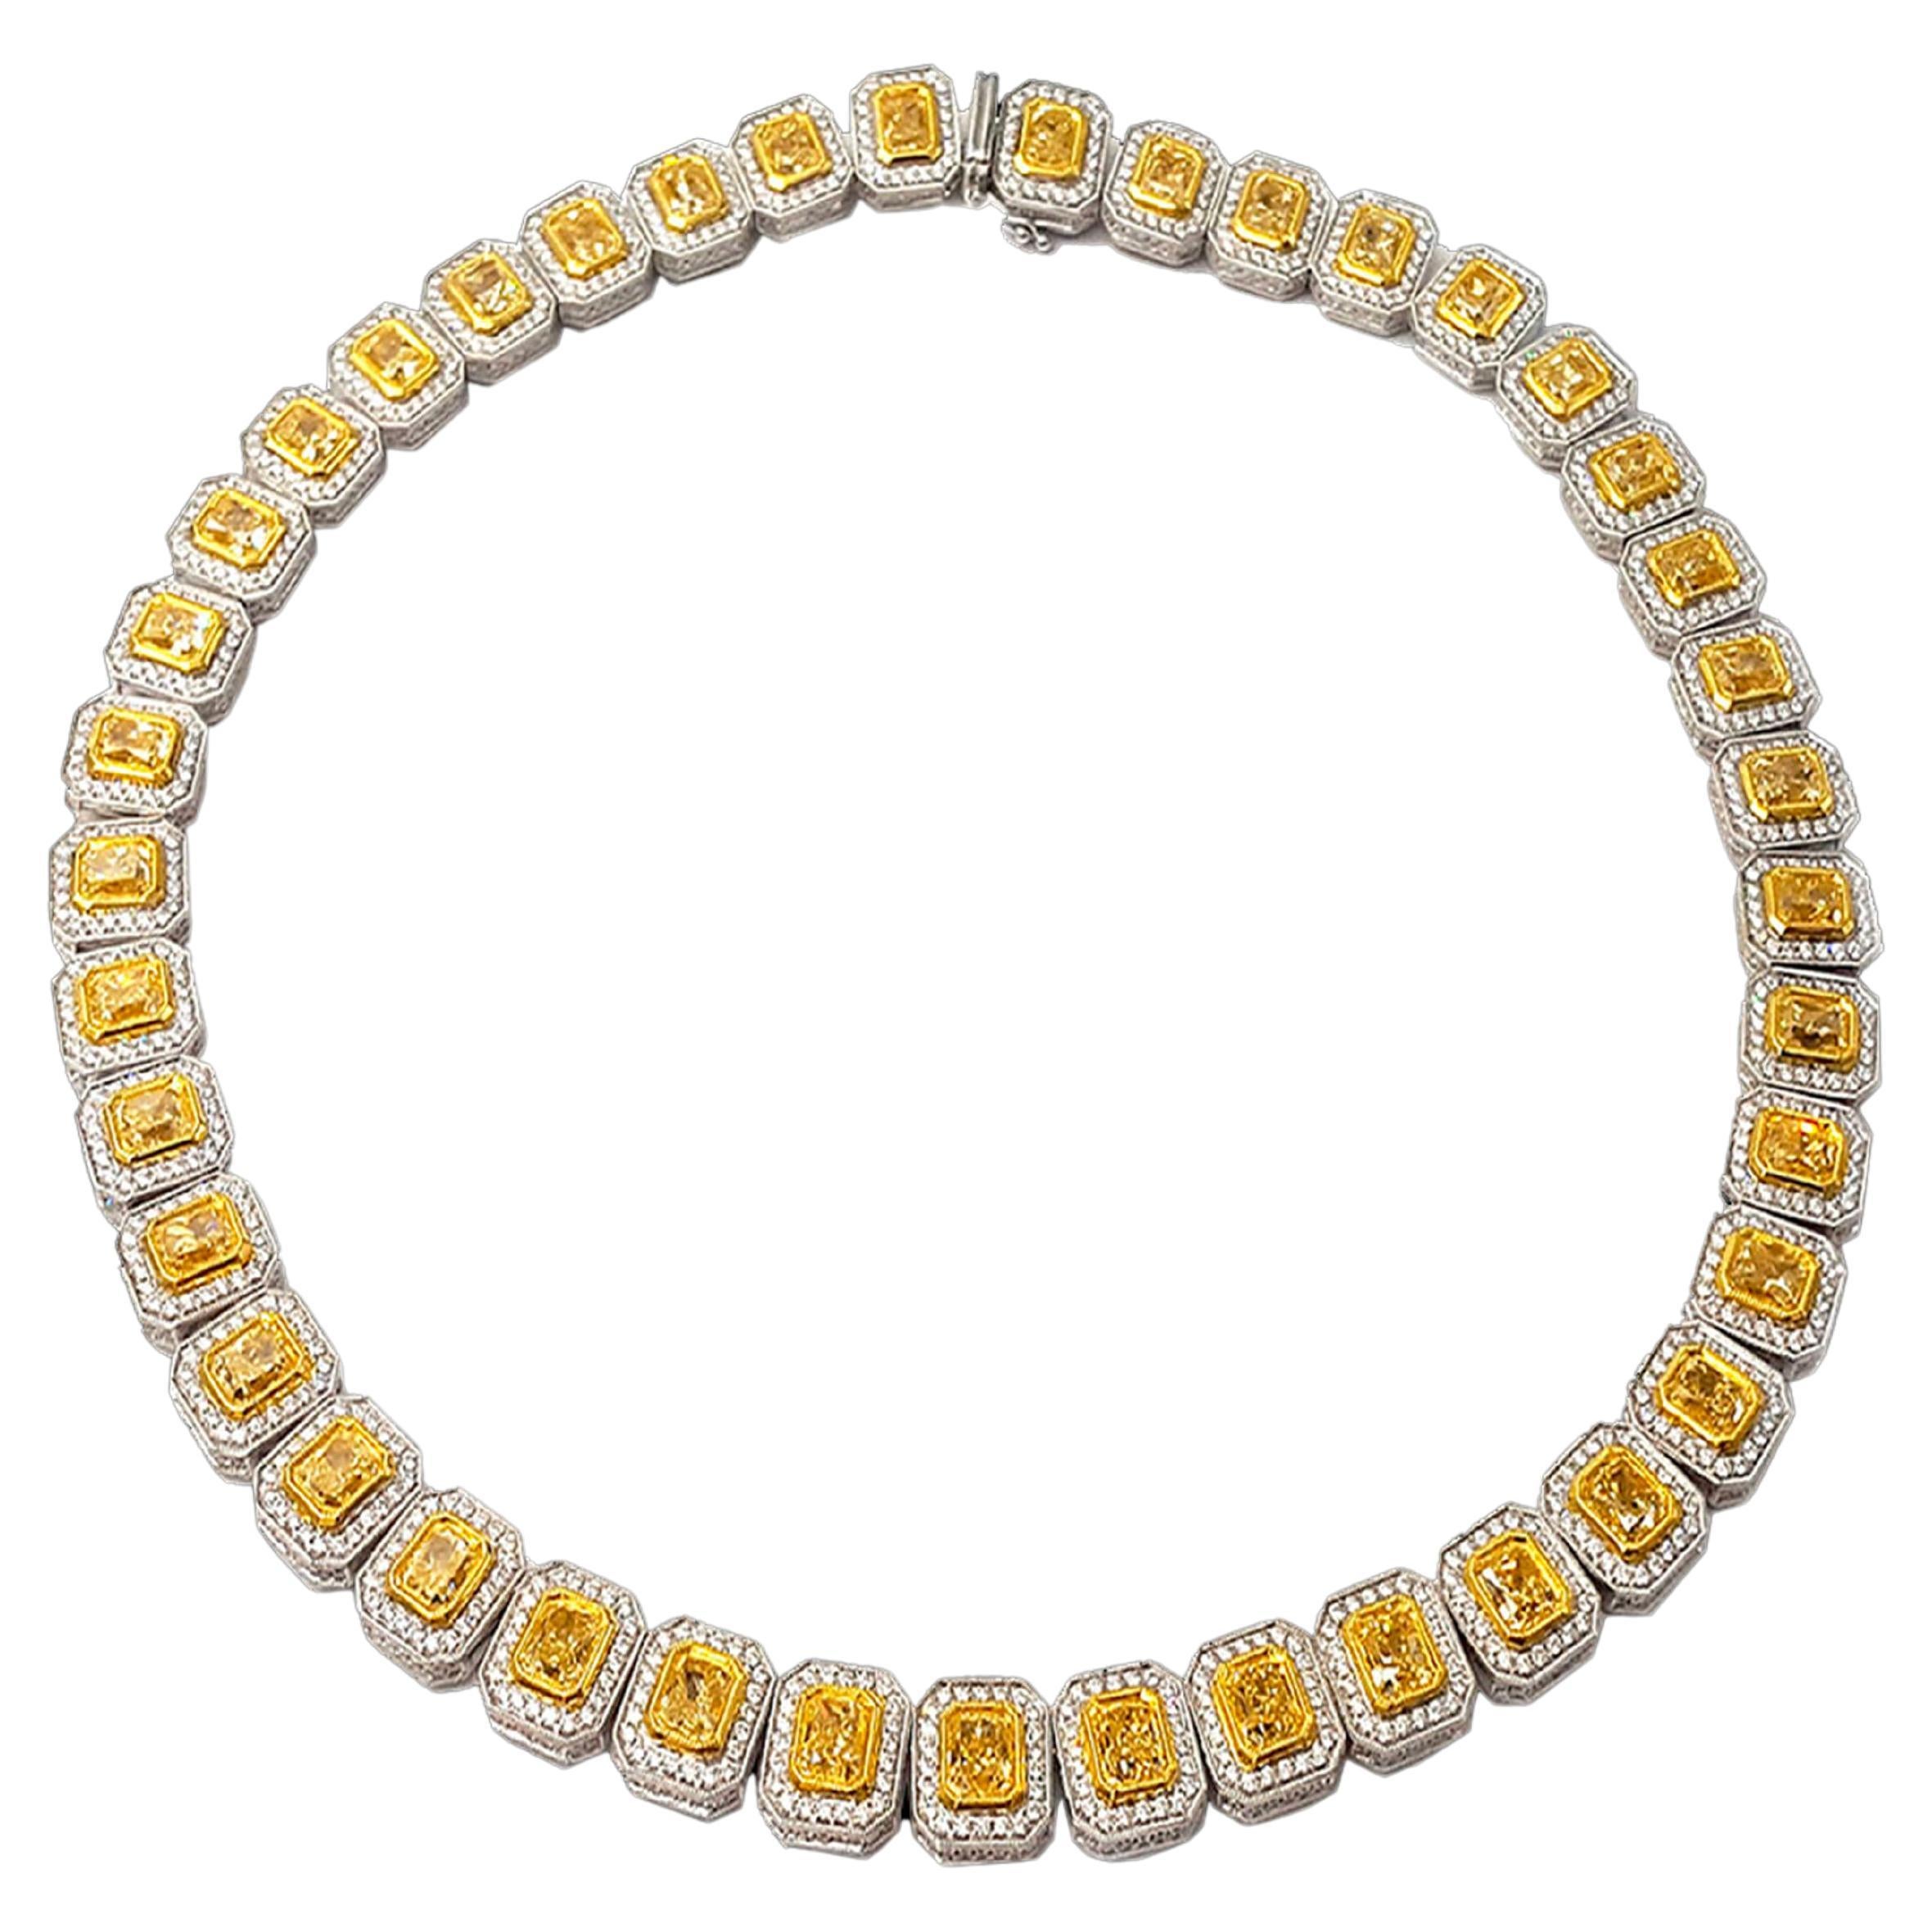 37 Carat Yellow and White Diamond Halo Eternity Necklace, Set in 18k Gold For Sale